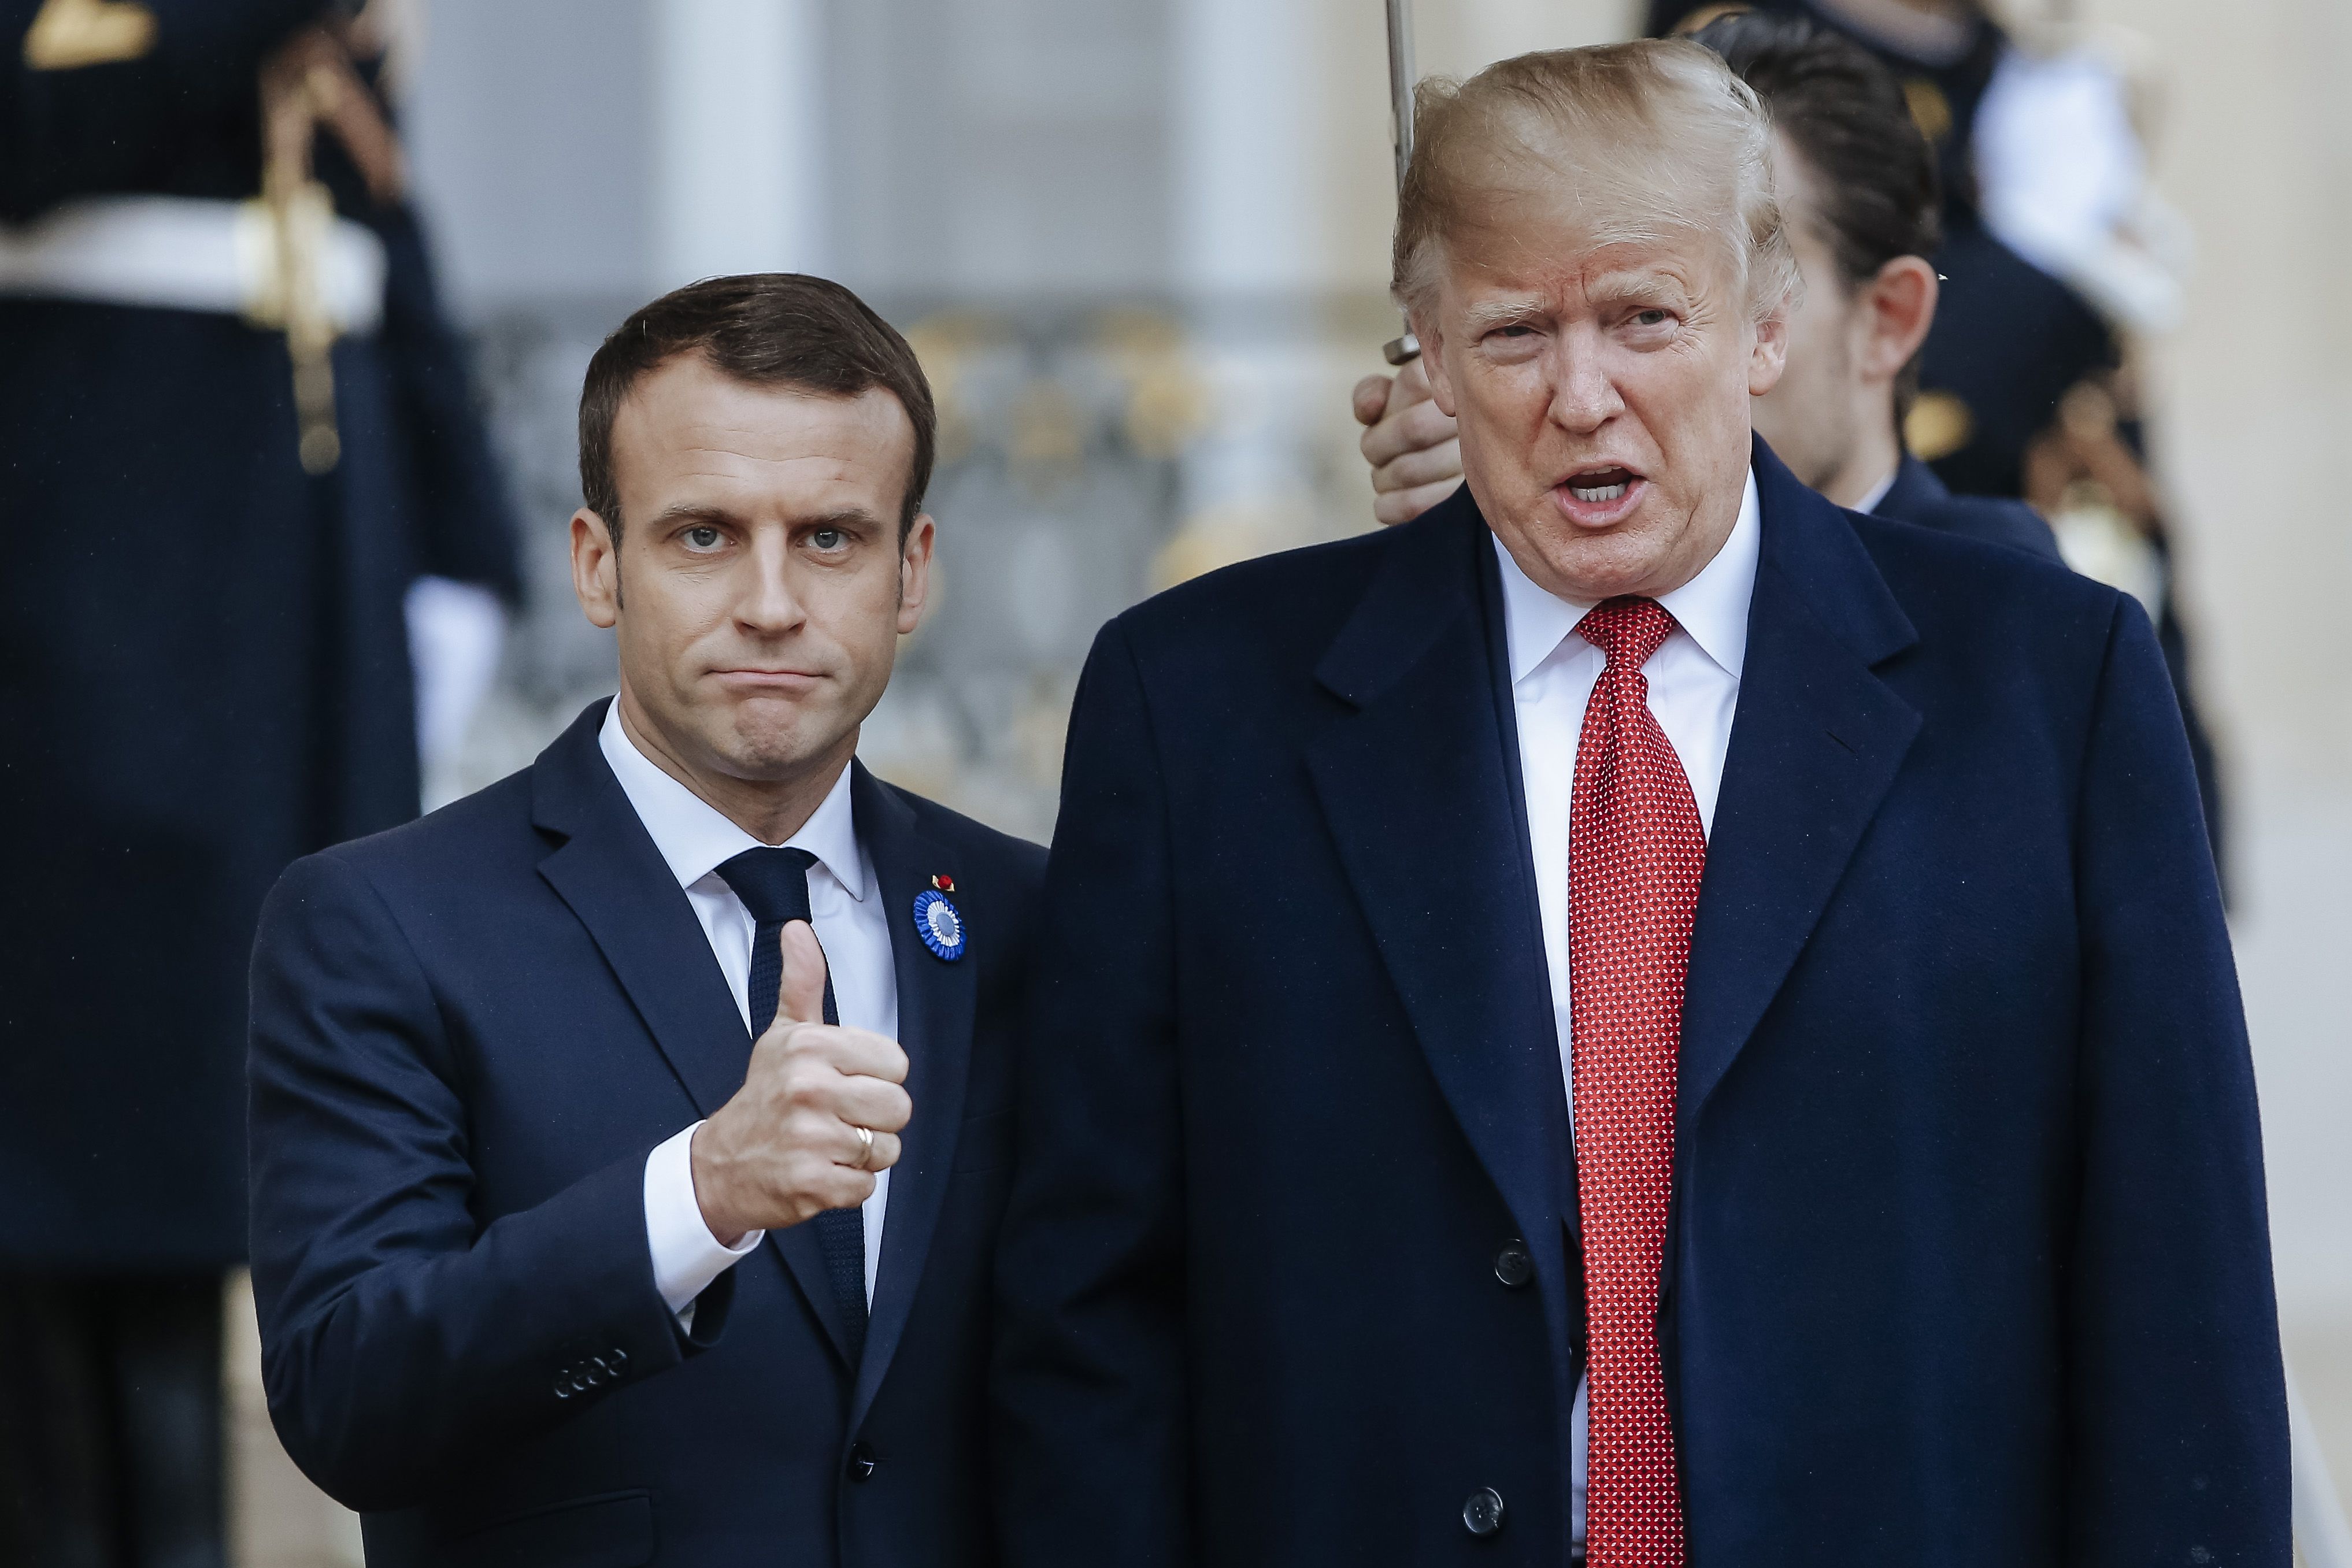 The Postillon: Trump disgusted that French copied tower from Paris